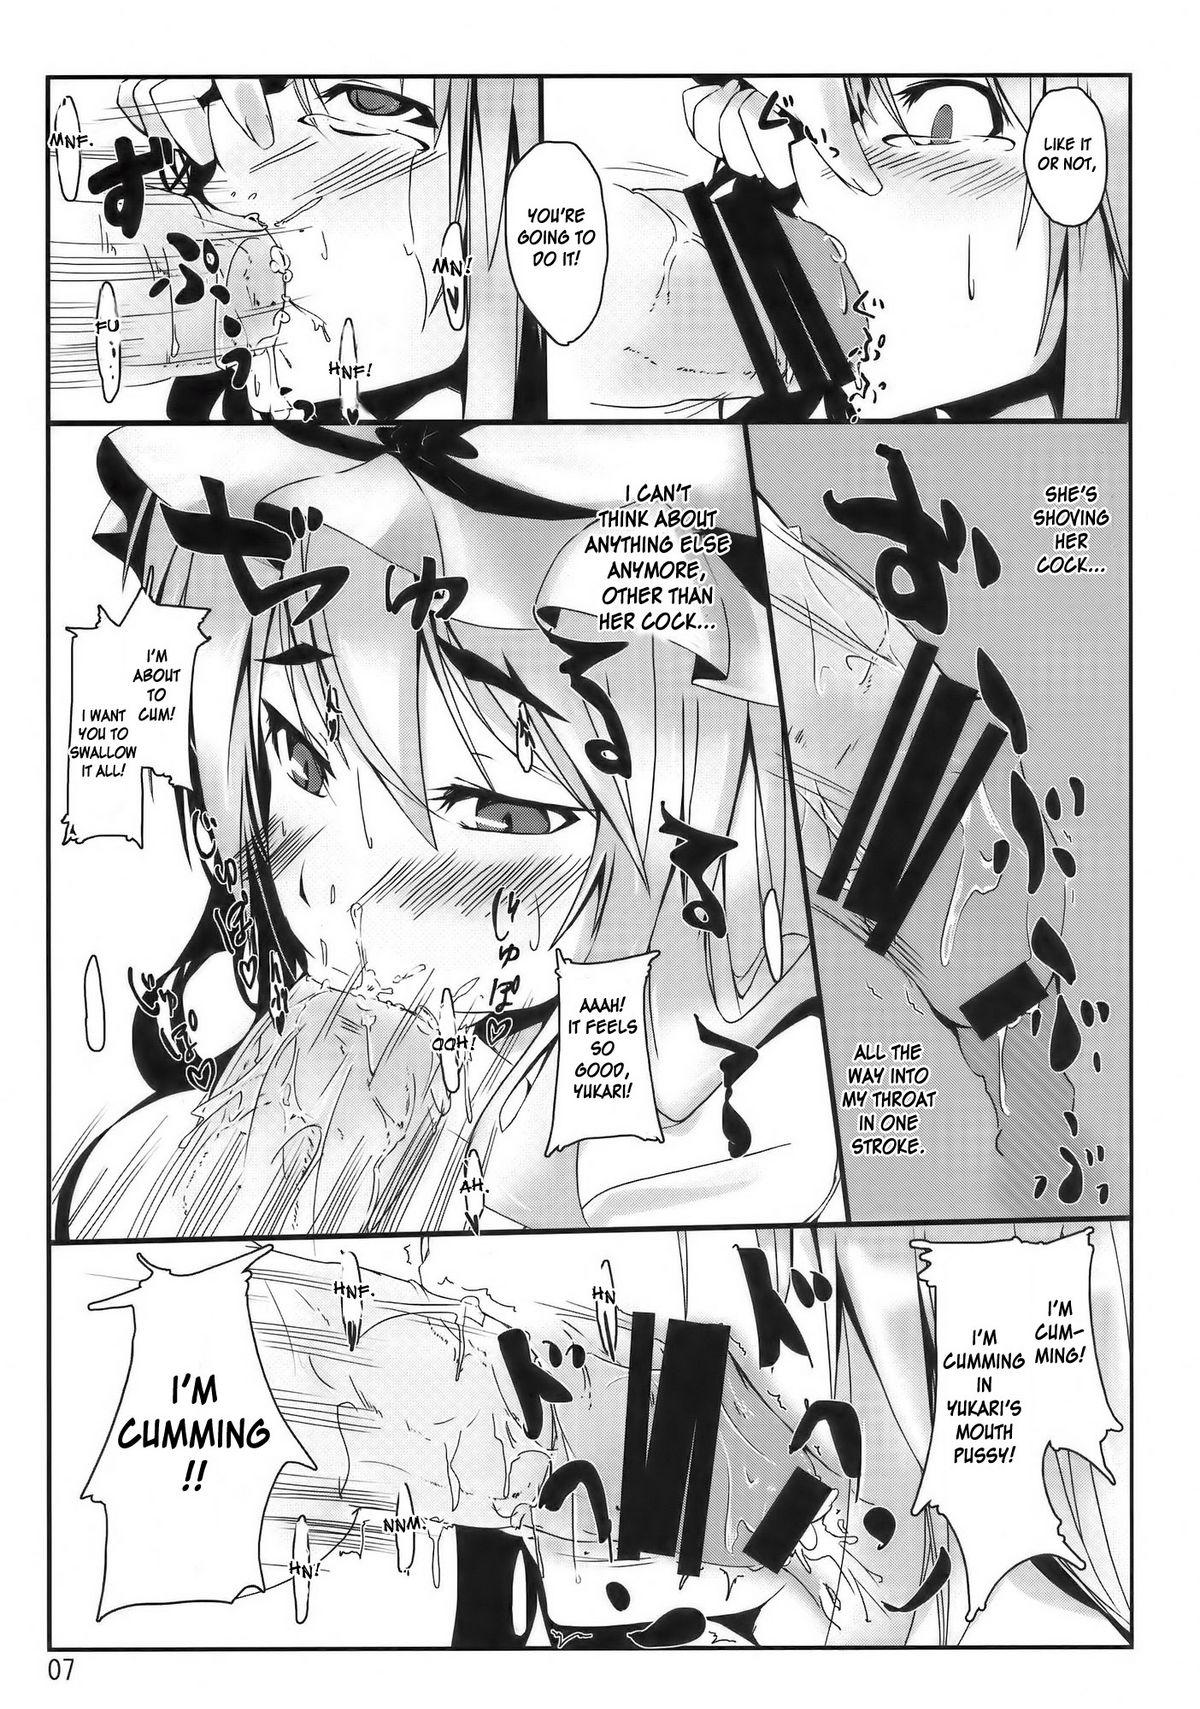 Submissive Touhou Mousou Kyou 13 - Touhou project Foreplay - Page 7